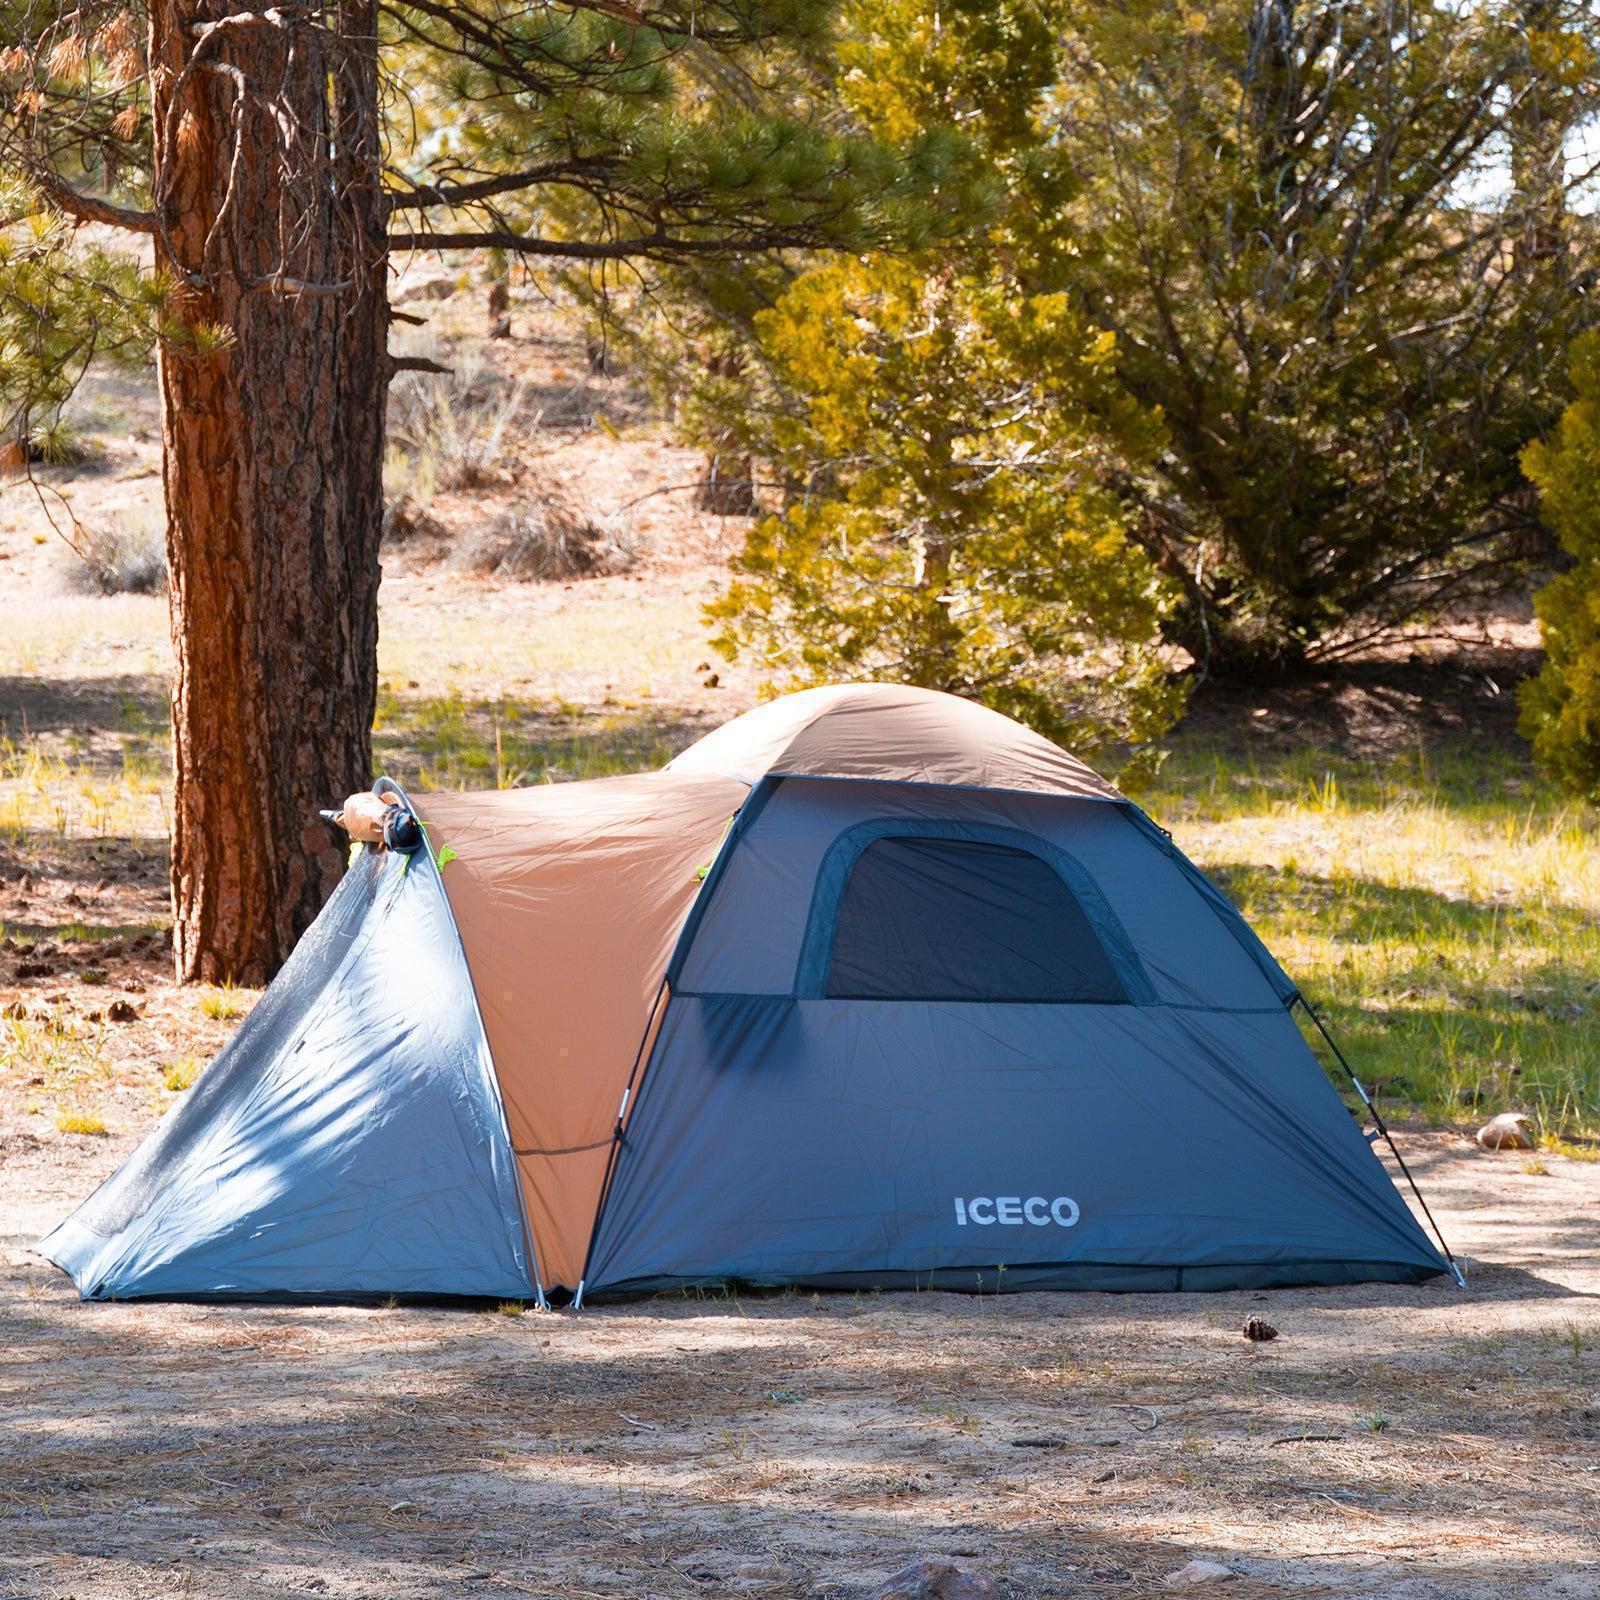 All Season 4 People Camping Tent | ICECO-Outdoor Gear-www.icecofreezer.com